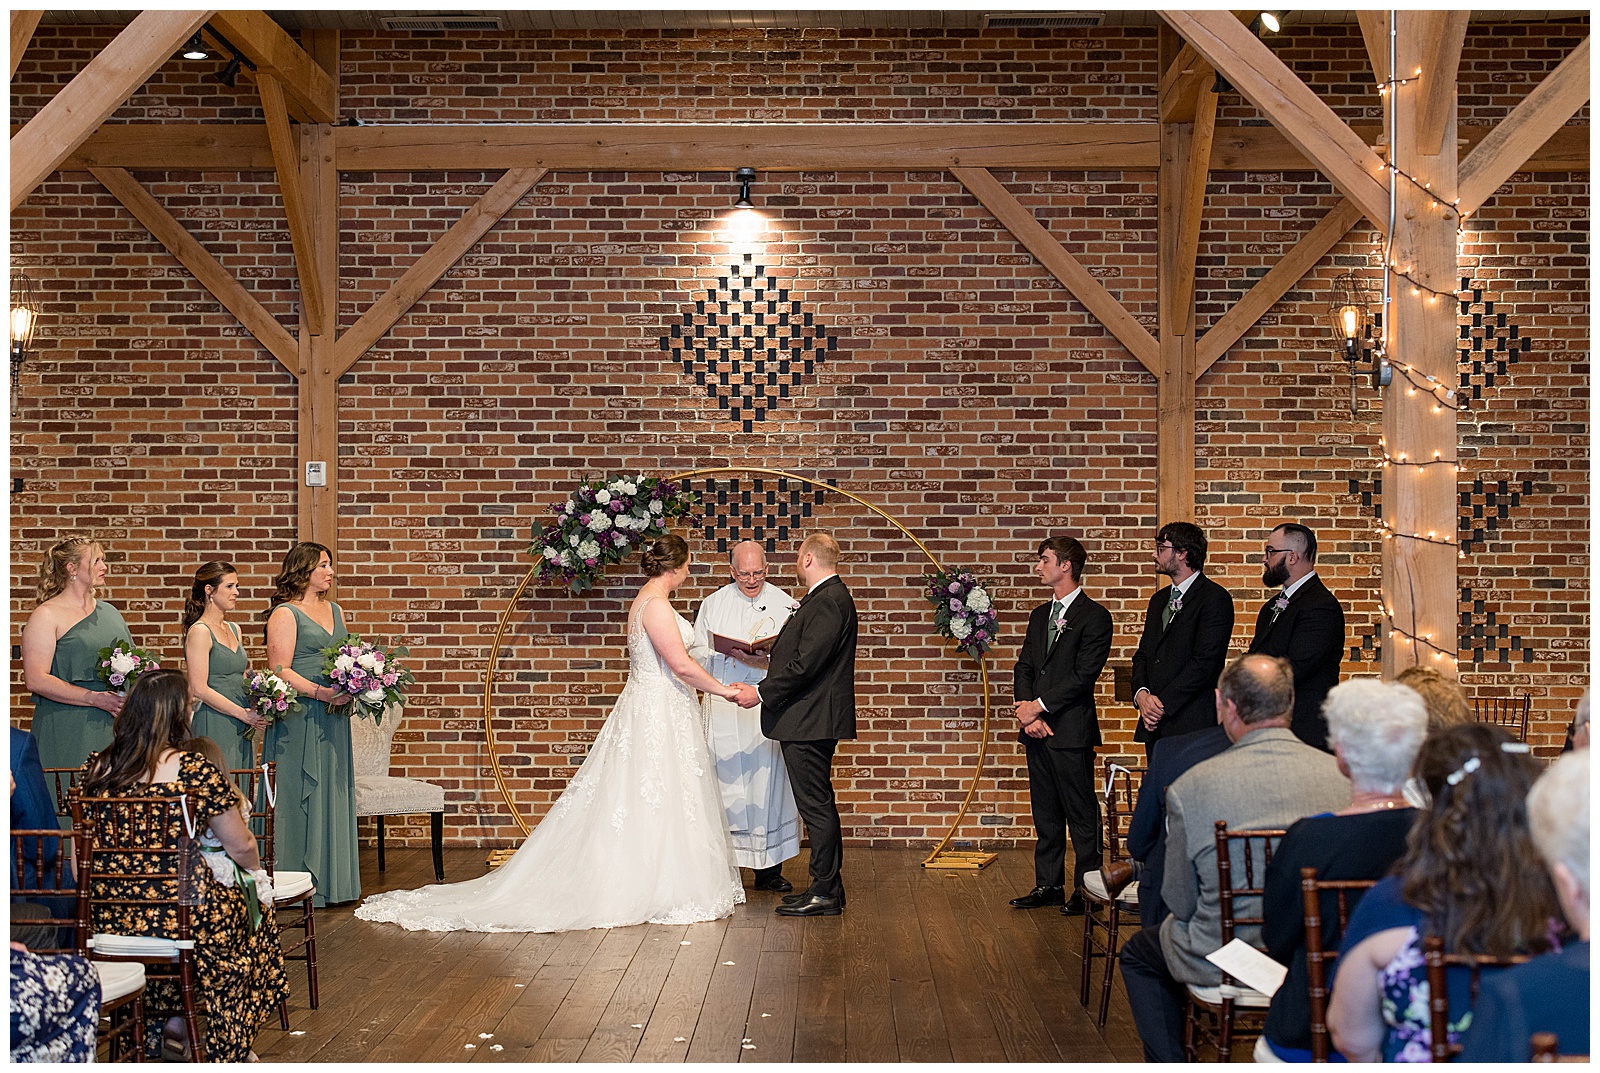 couple holding hands during barn wedding ceremony by beautiful brick wall at brick gables